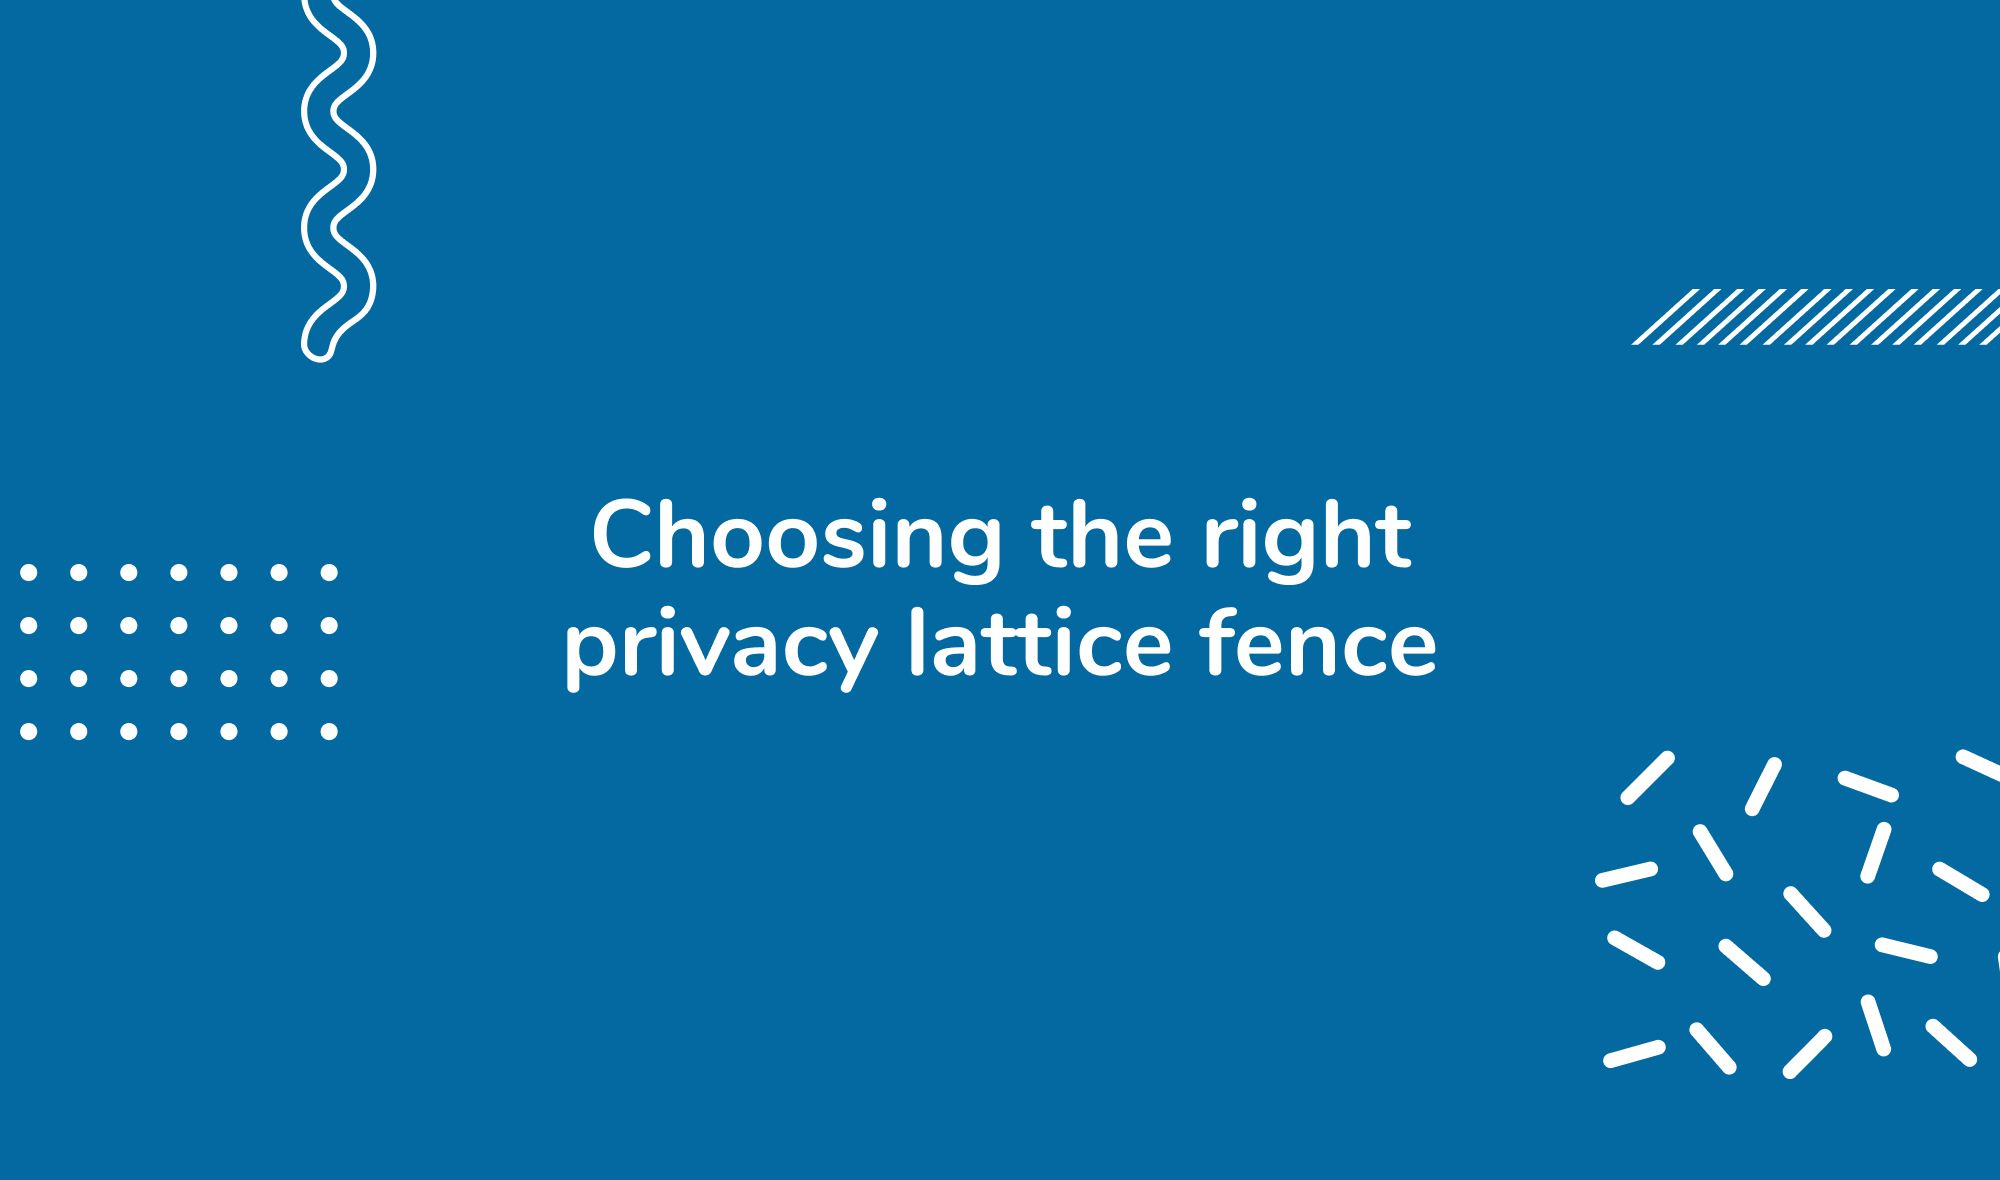 Choosing the right privacy lattice fence